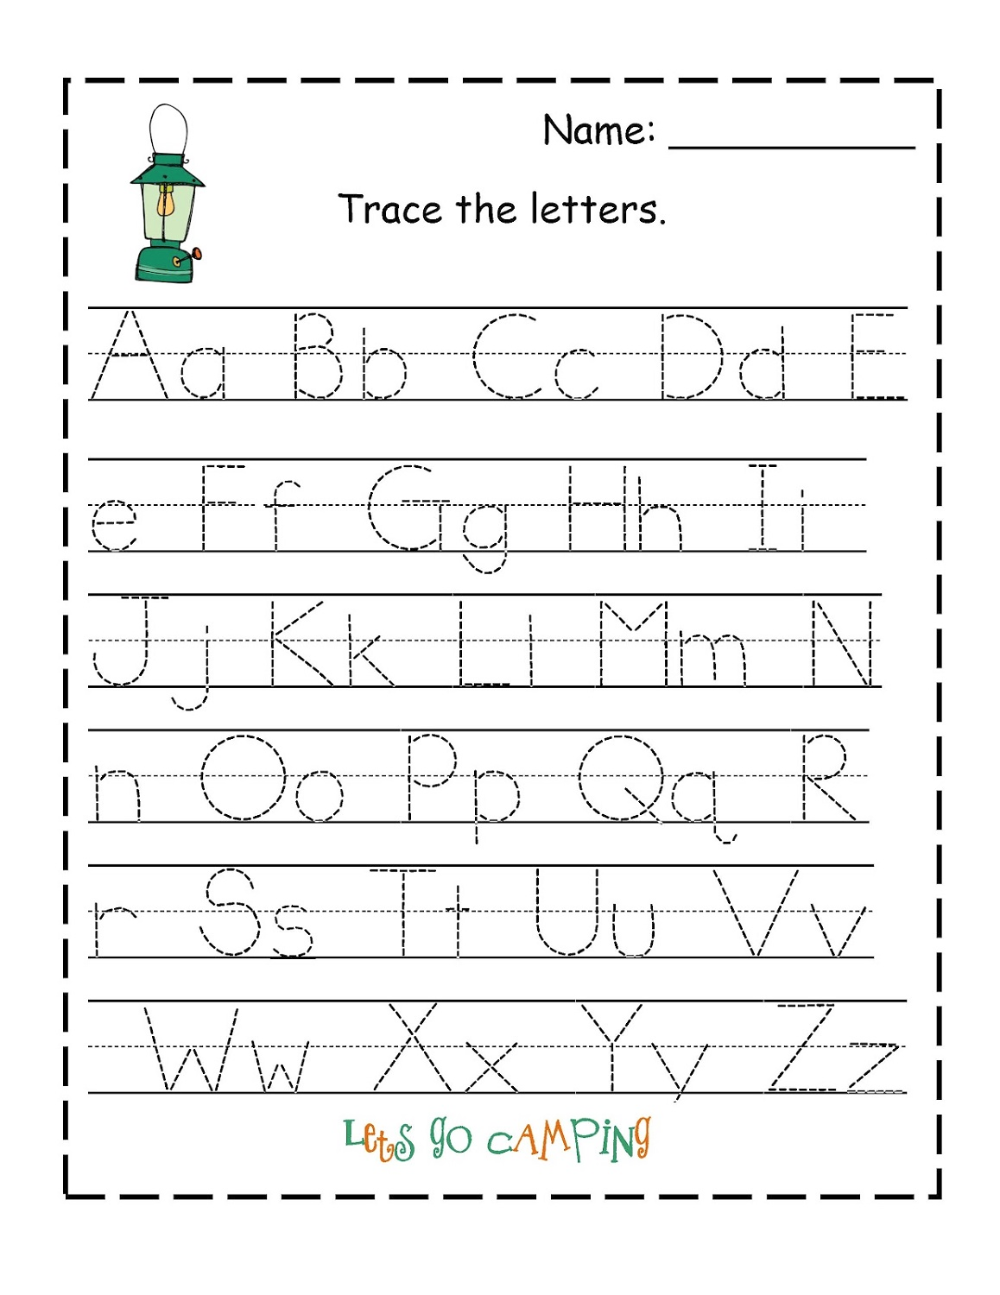 Traceable Alphabet Worksheets A-Z (With Images) | Preschool